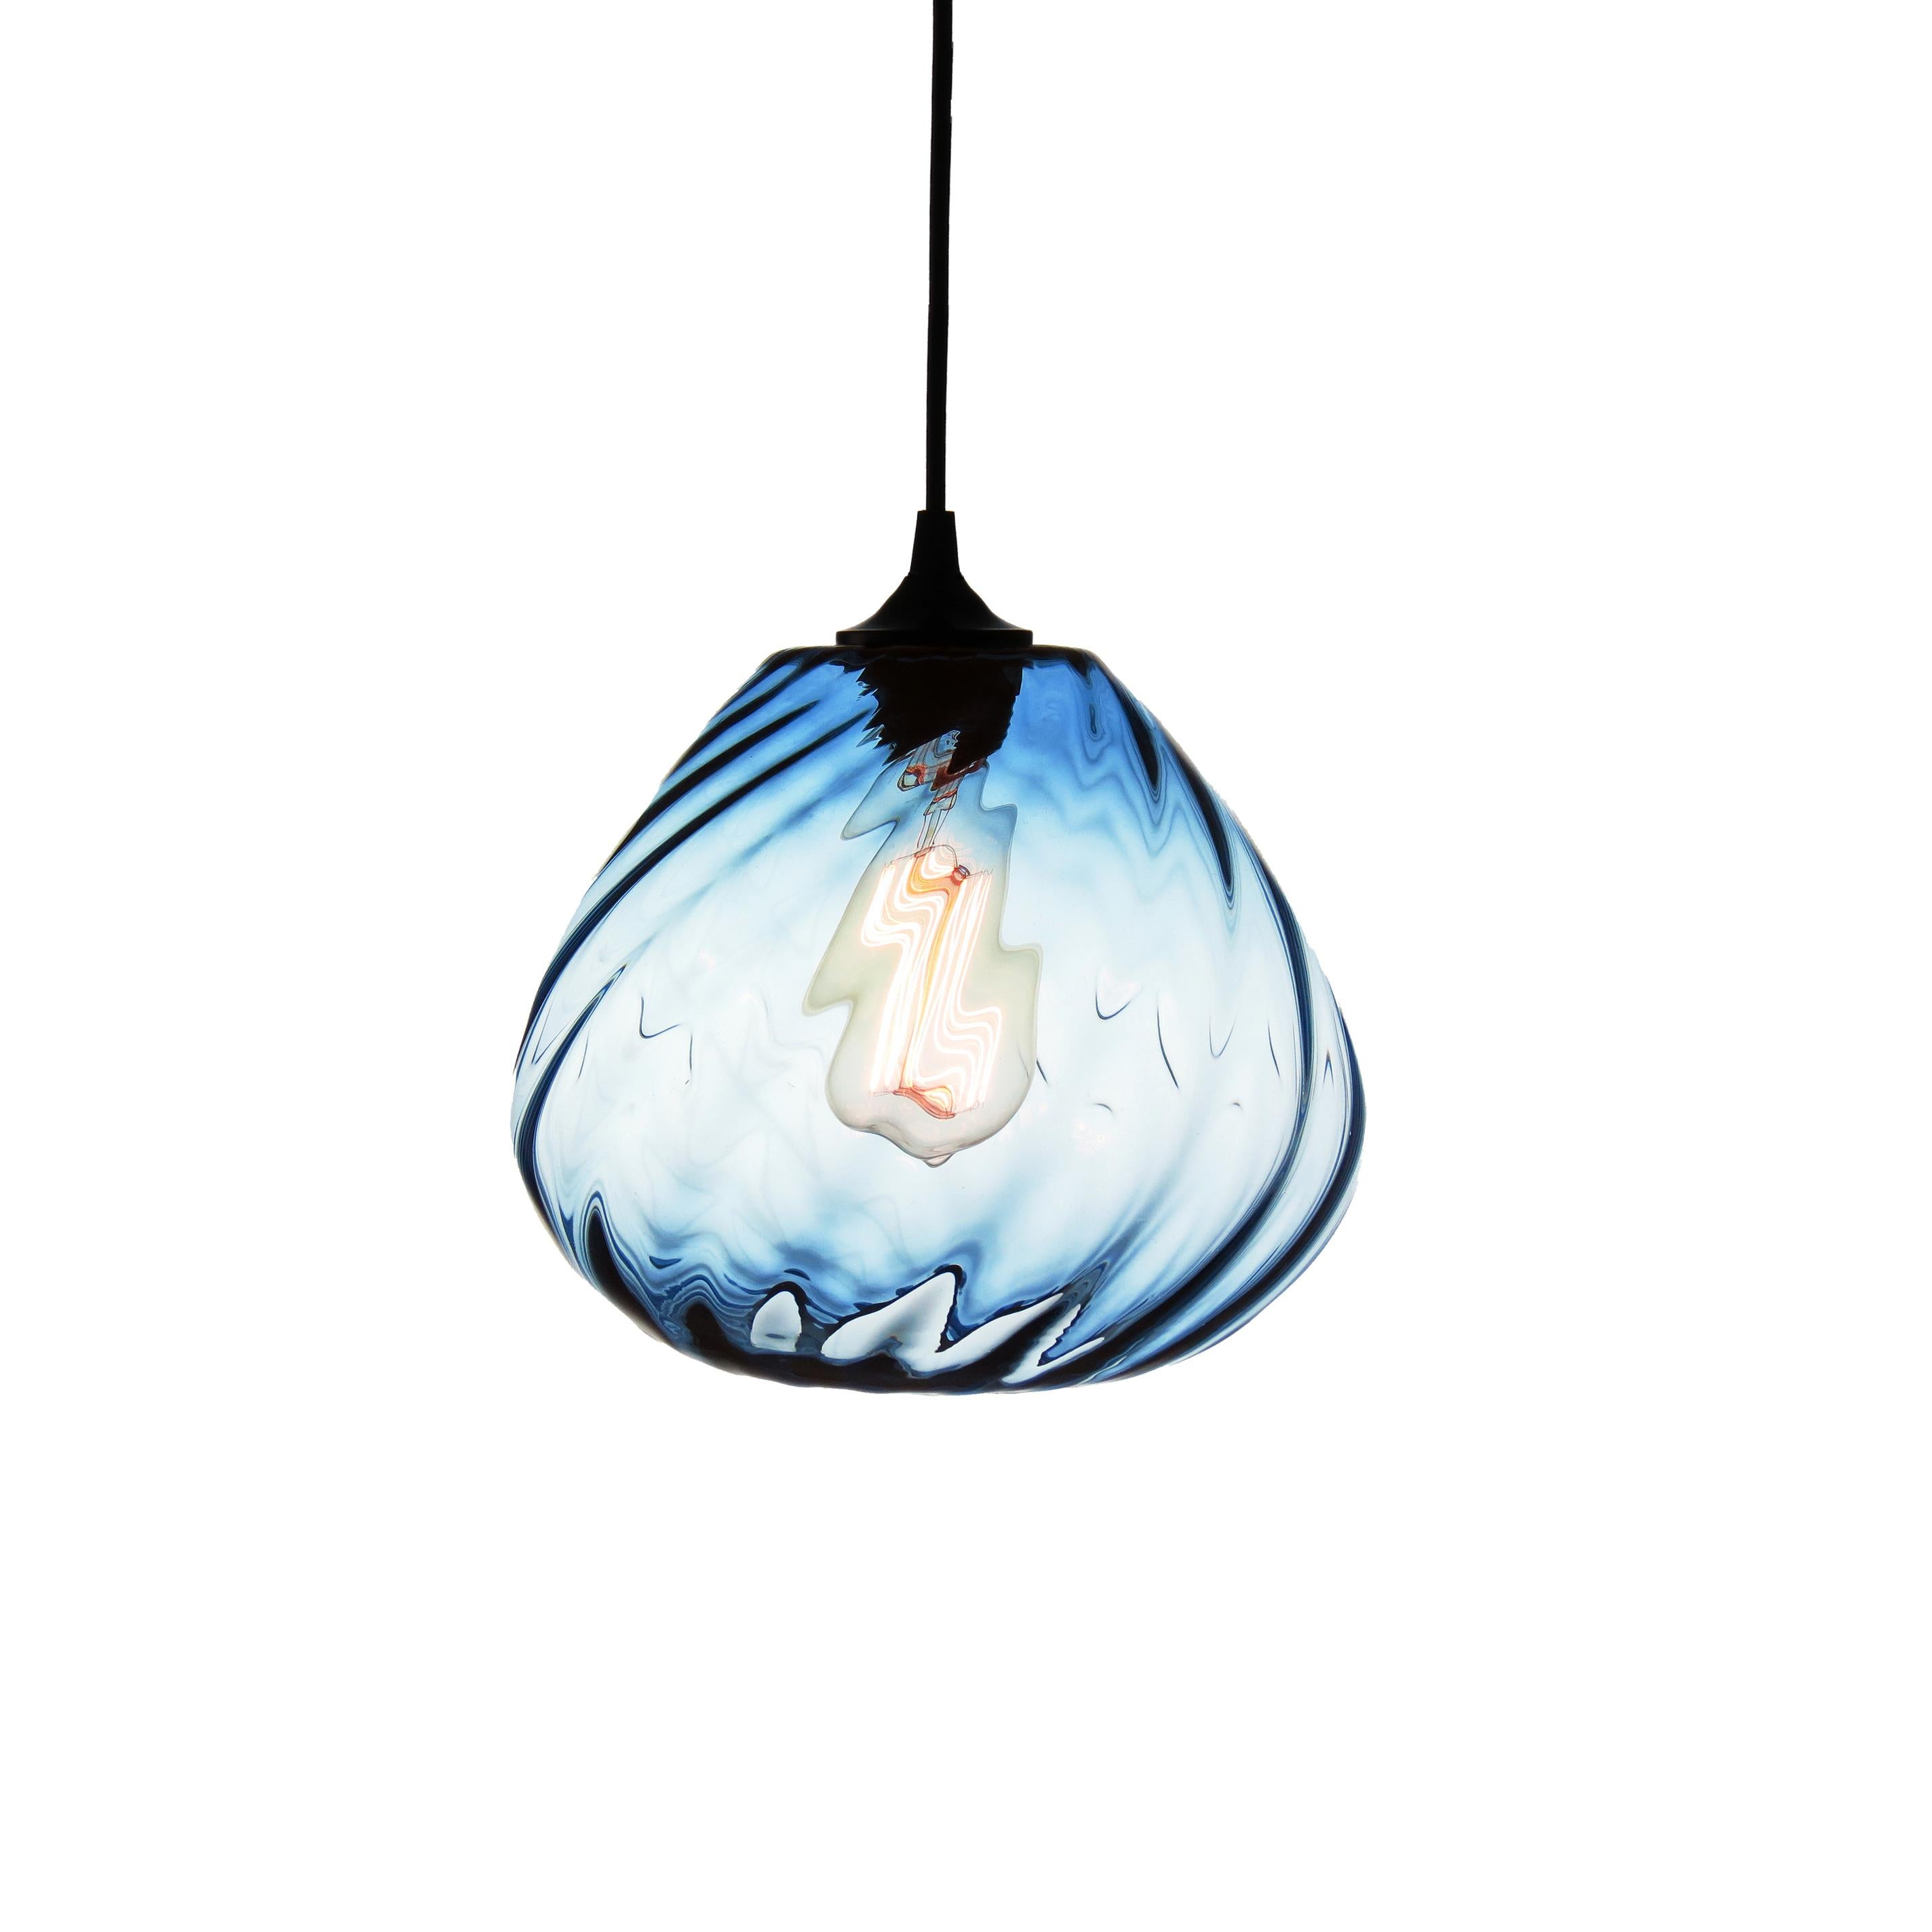 Mexican Golden Olive Modern Transparent Hand Blown Glass Architectural Pendant Lamp For Sale